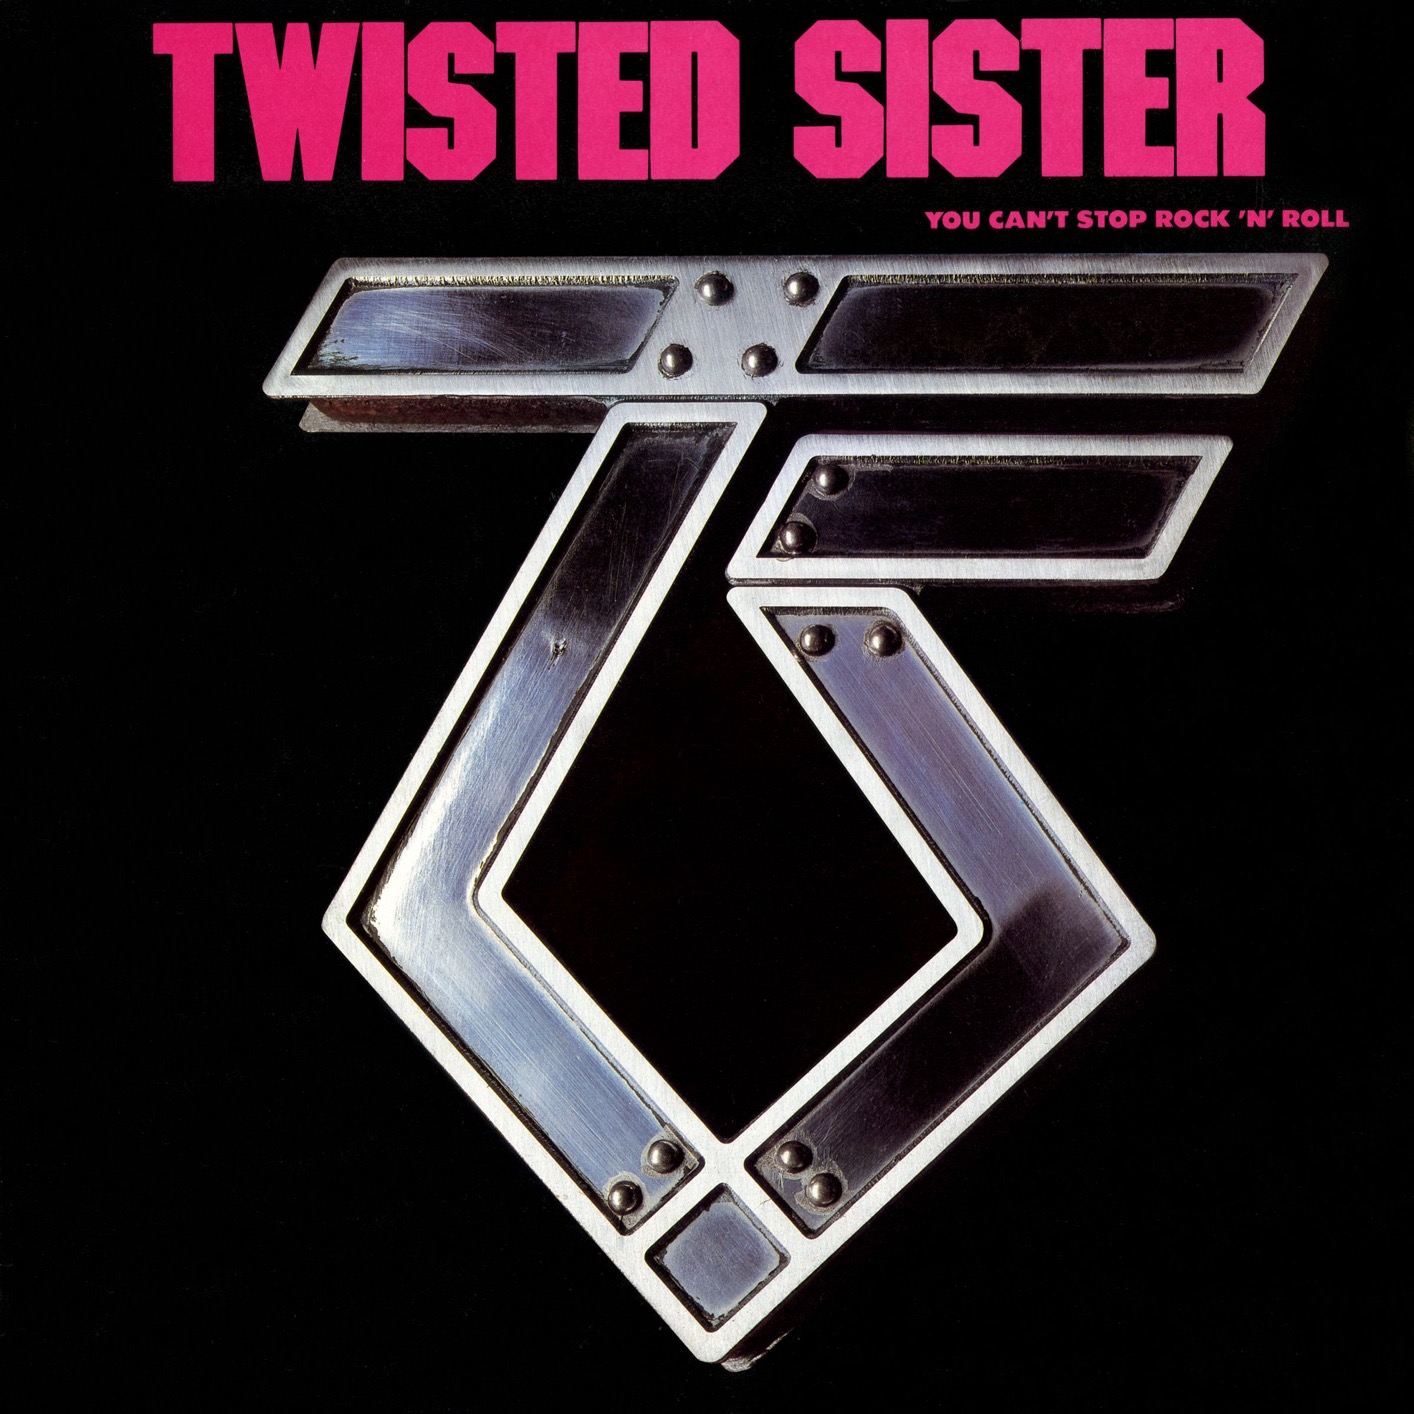 Twisted Sister - You Can’t Stop Rock ‘N’ Roll (1983/2017) [AcousticSounds FLAC 24bit/192kHz]